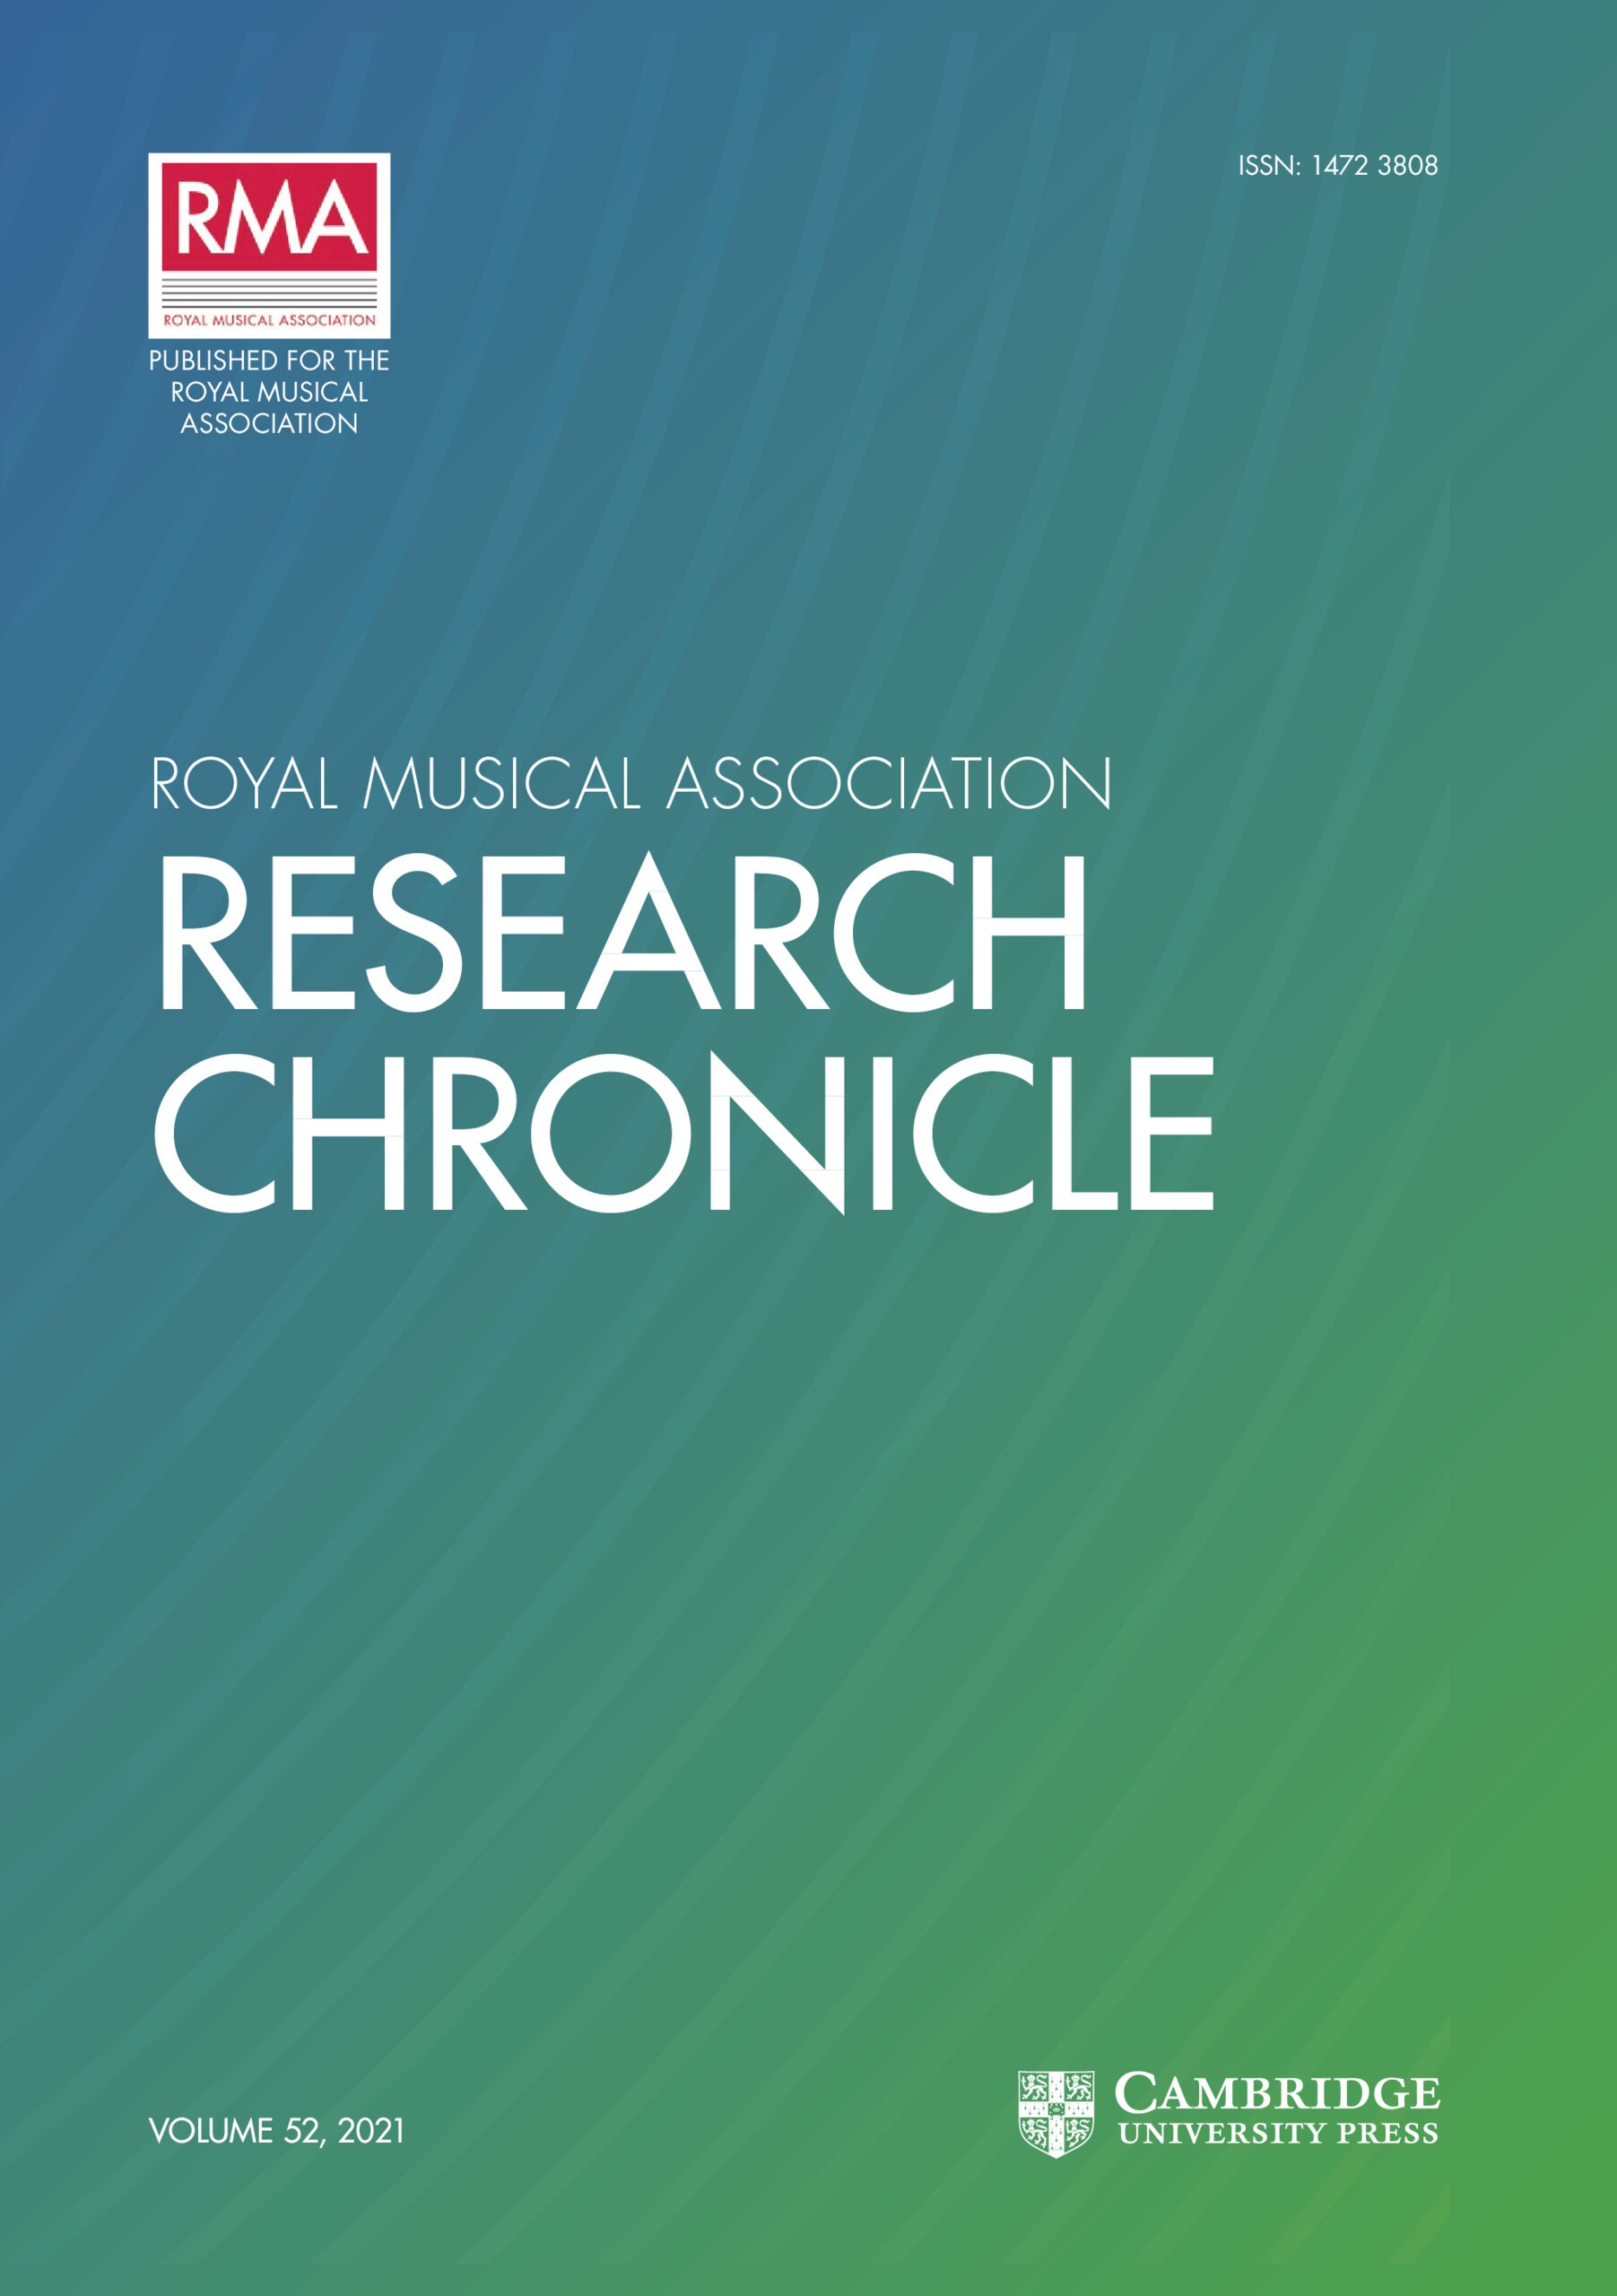 Royal Musical Association Research Chronicle